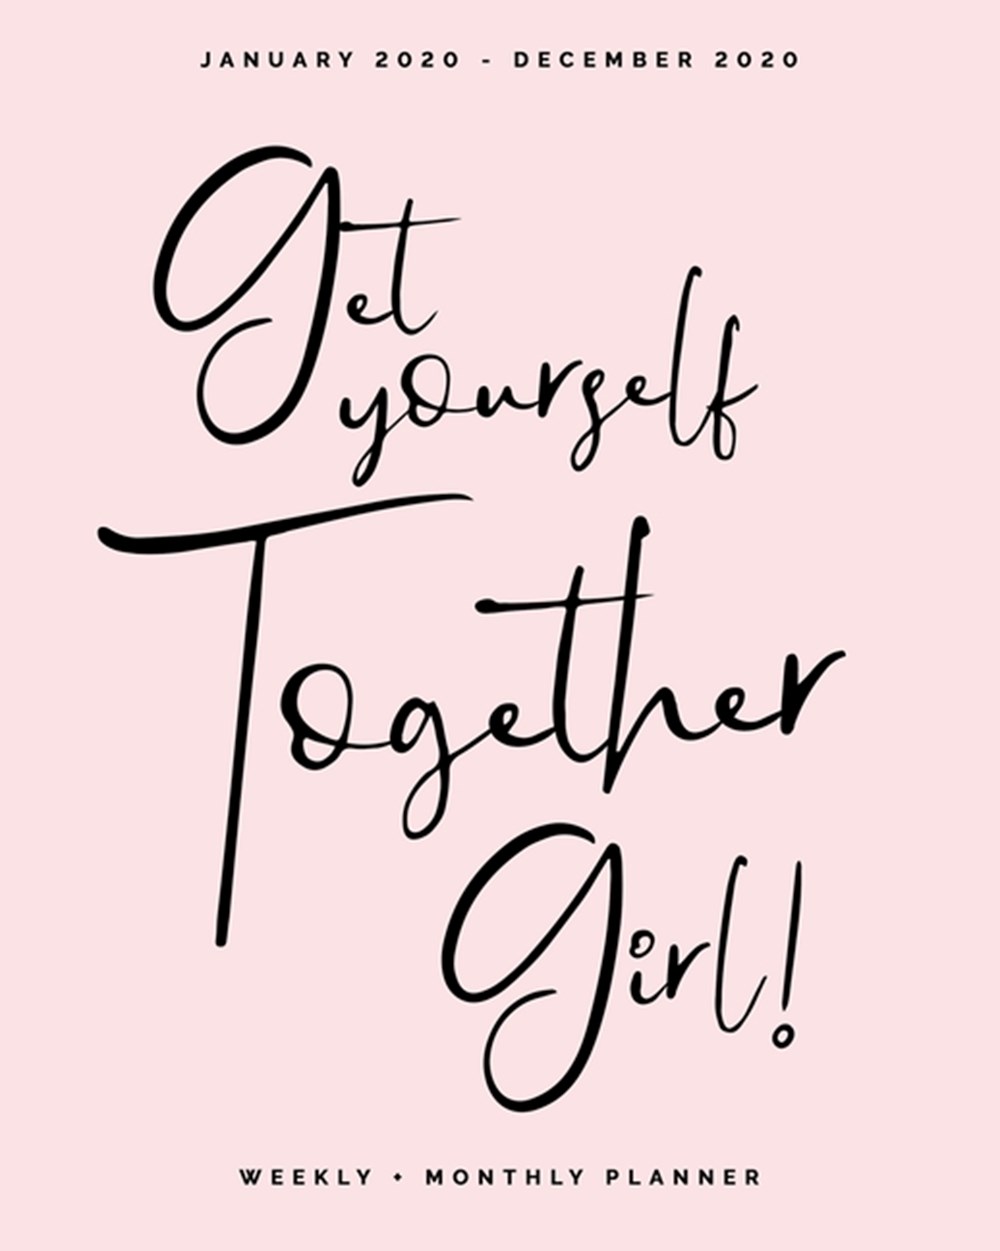 Get Yourself Together Girl! - January 2020 - December 2020 - Weekly + Monthly Planner Blush Pink Ins